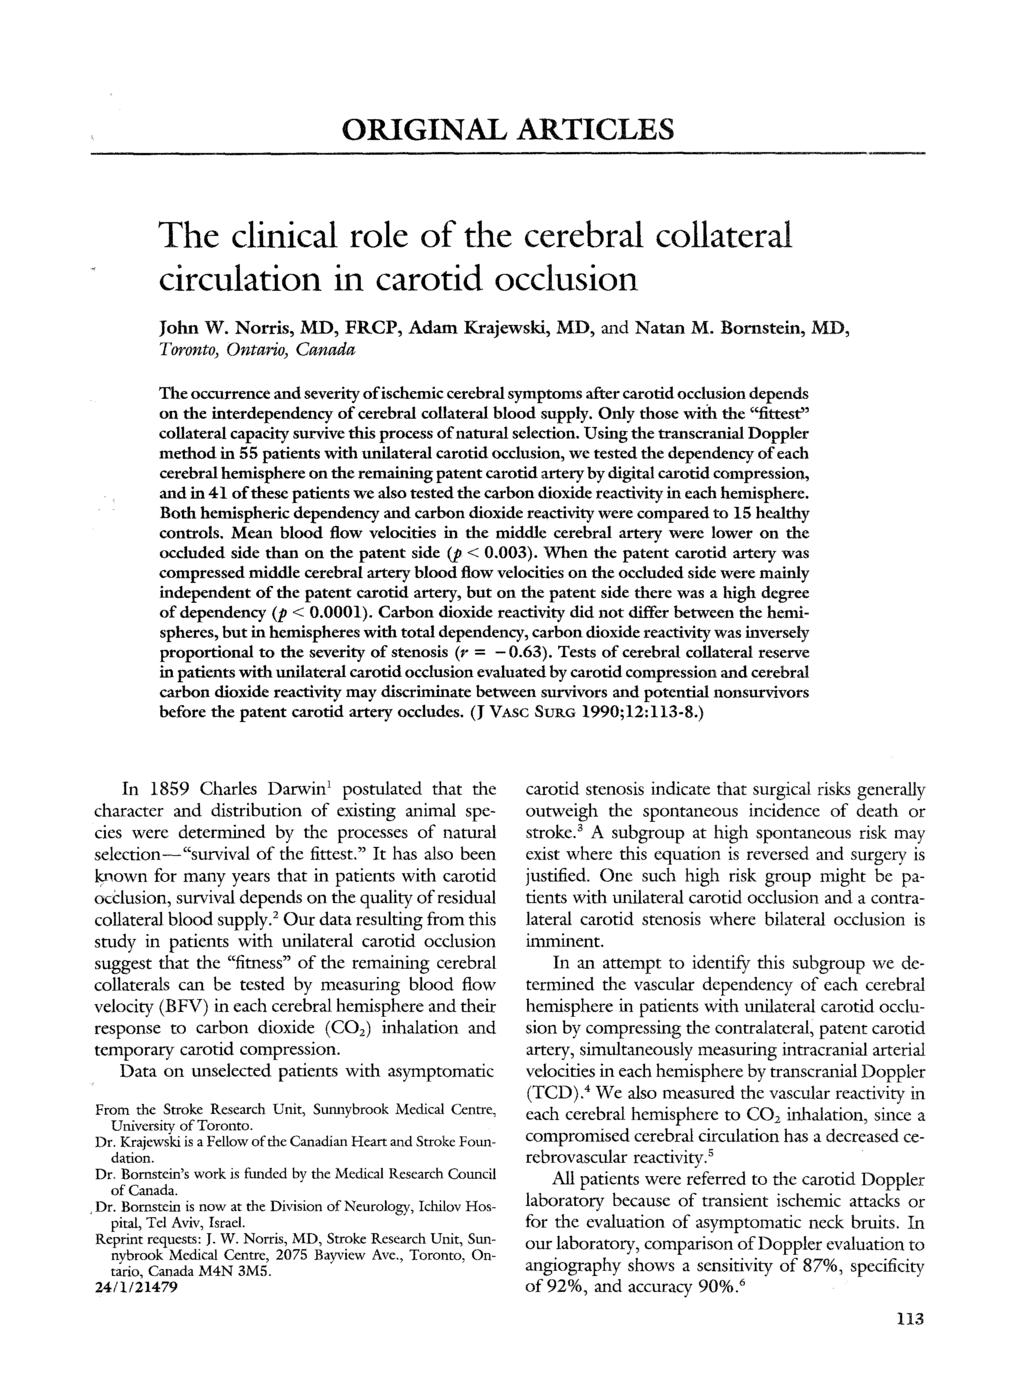 ORIGINAL ARTICLES The clinical role of the cerebral collateral circulation in carotid occlusion John W. Norris, MD, FRCP, Adam Krajewski, MD, and Natan M.